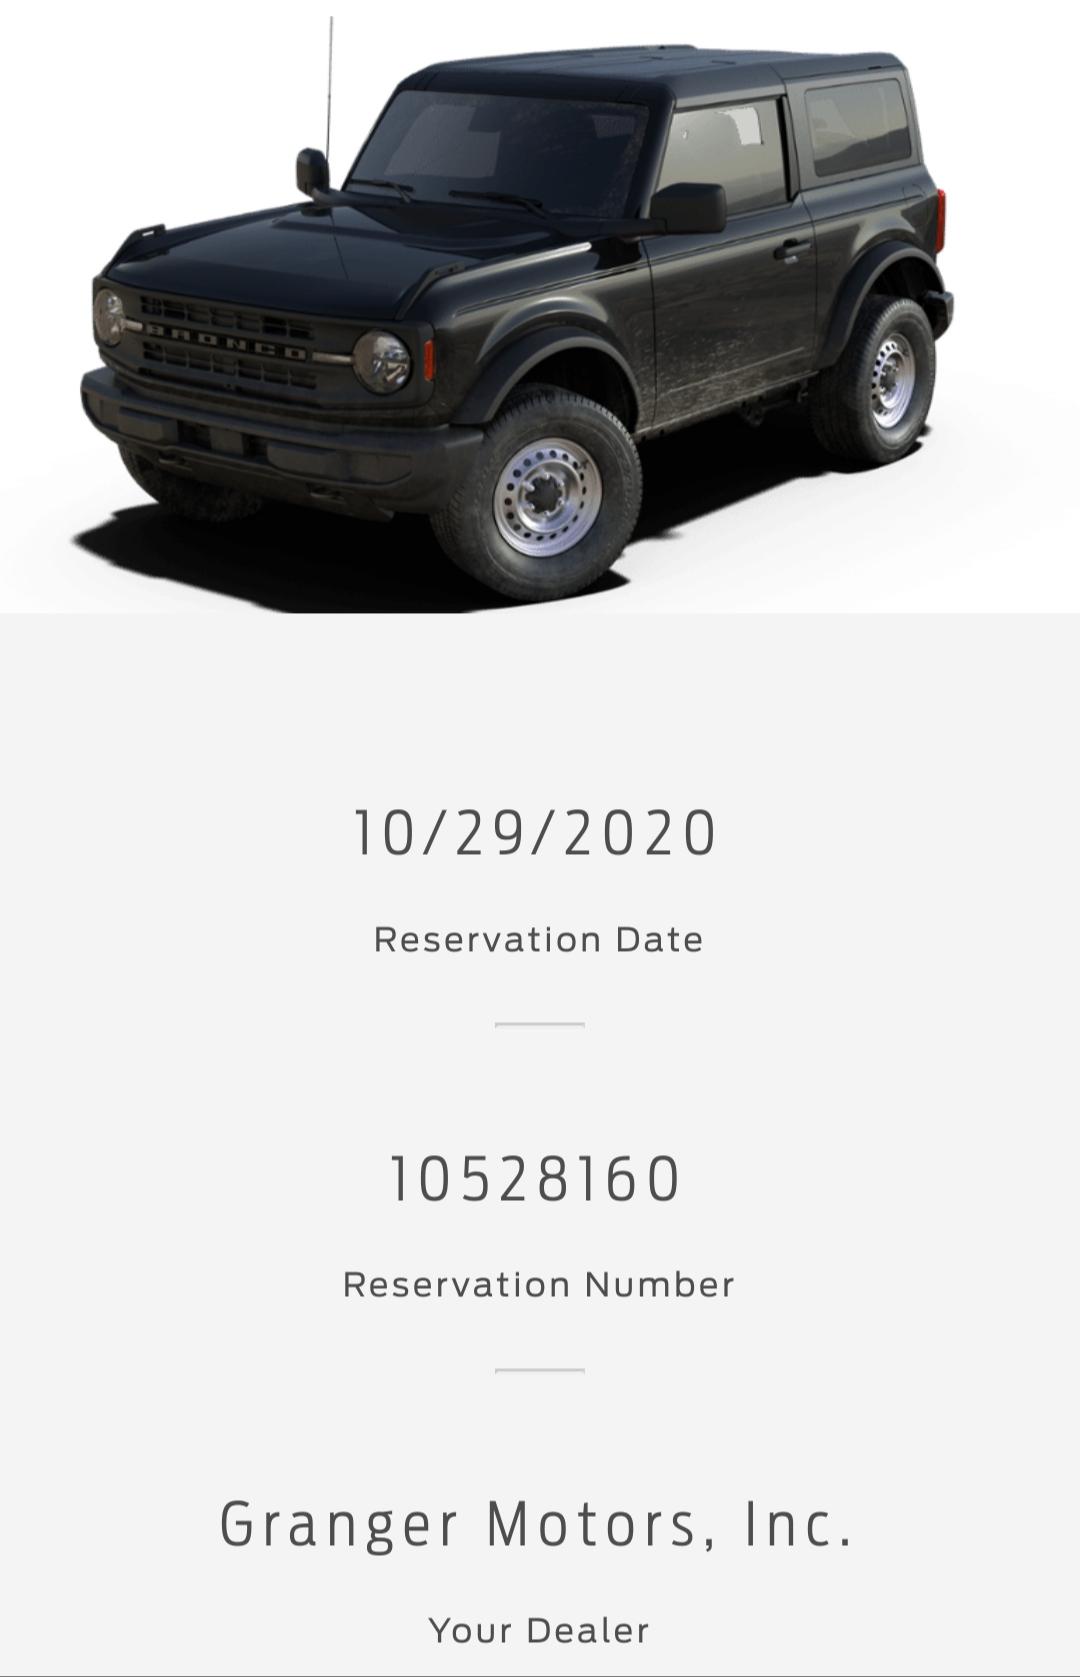 Ford Bronco $2000 off Invoice on October Bronco Reservations at Granger Ford 20201029_194035